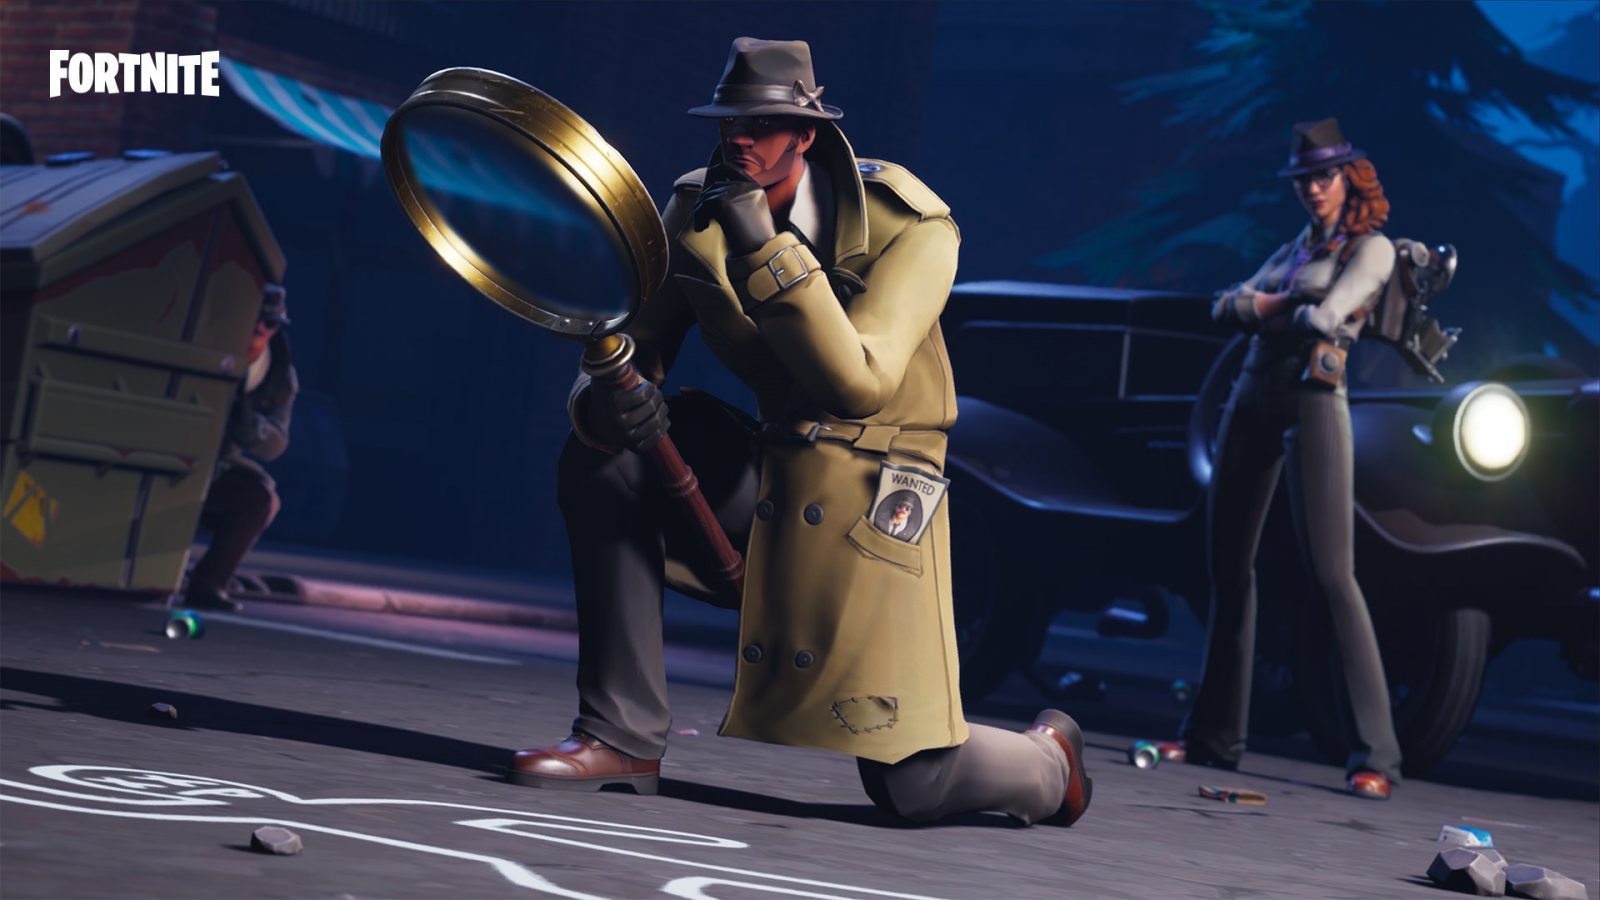 High Definition Wallpaper Of Sleuth From Fortnite Paperpull